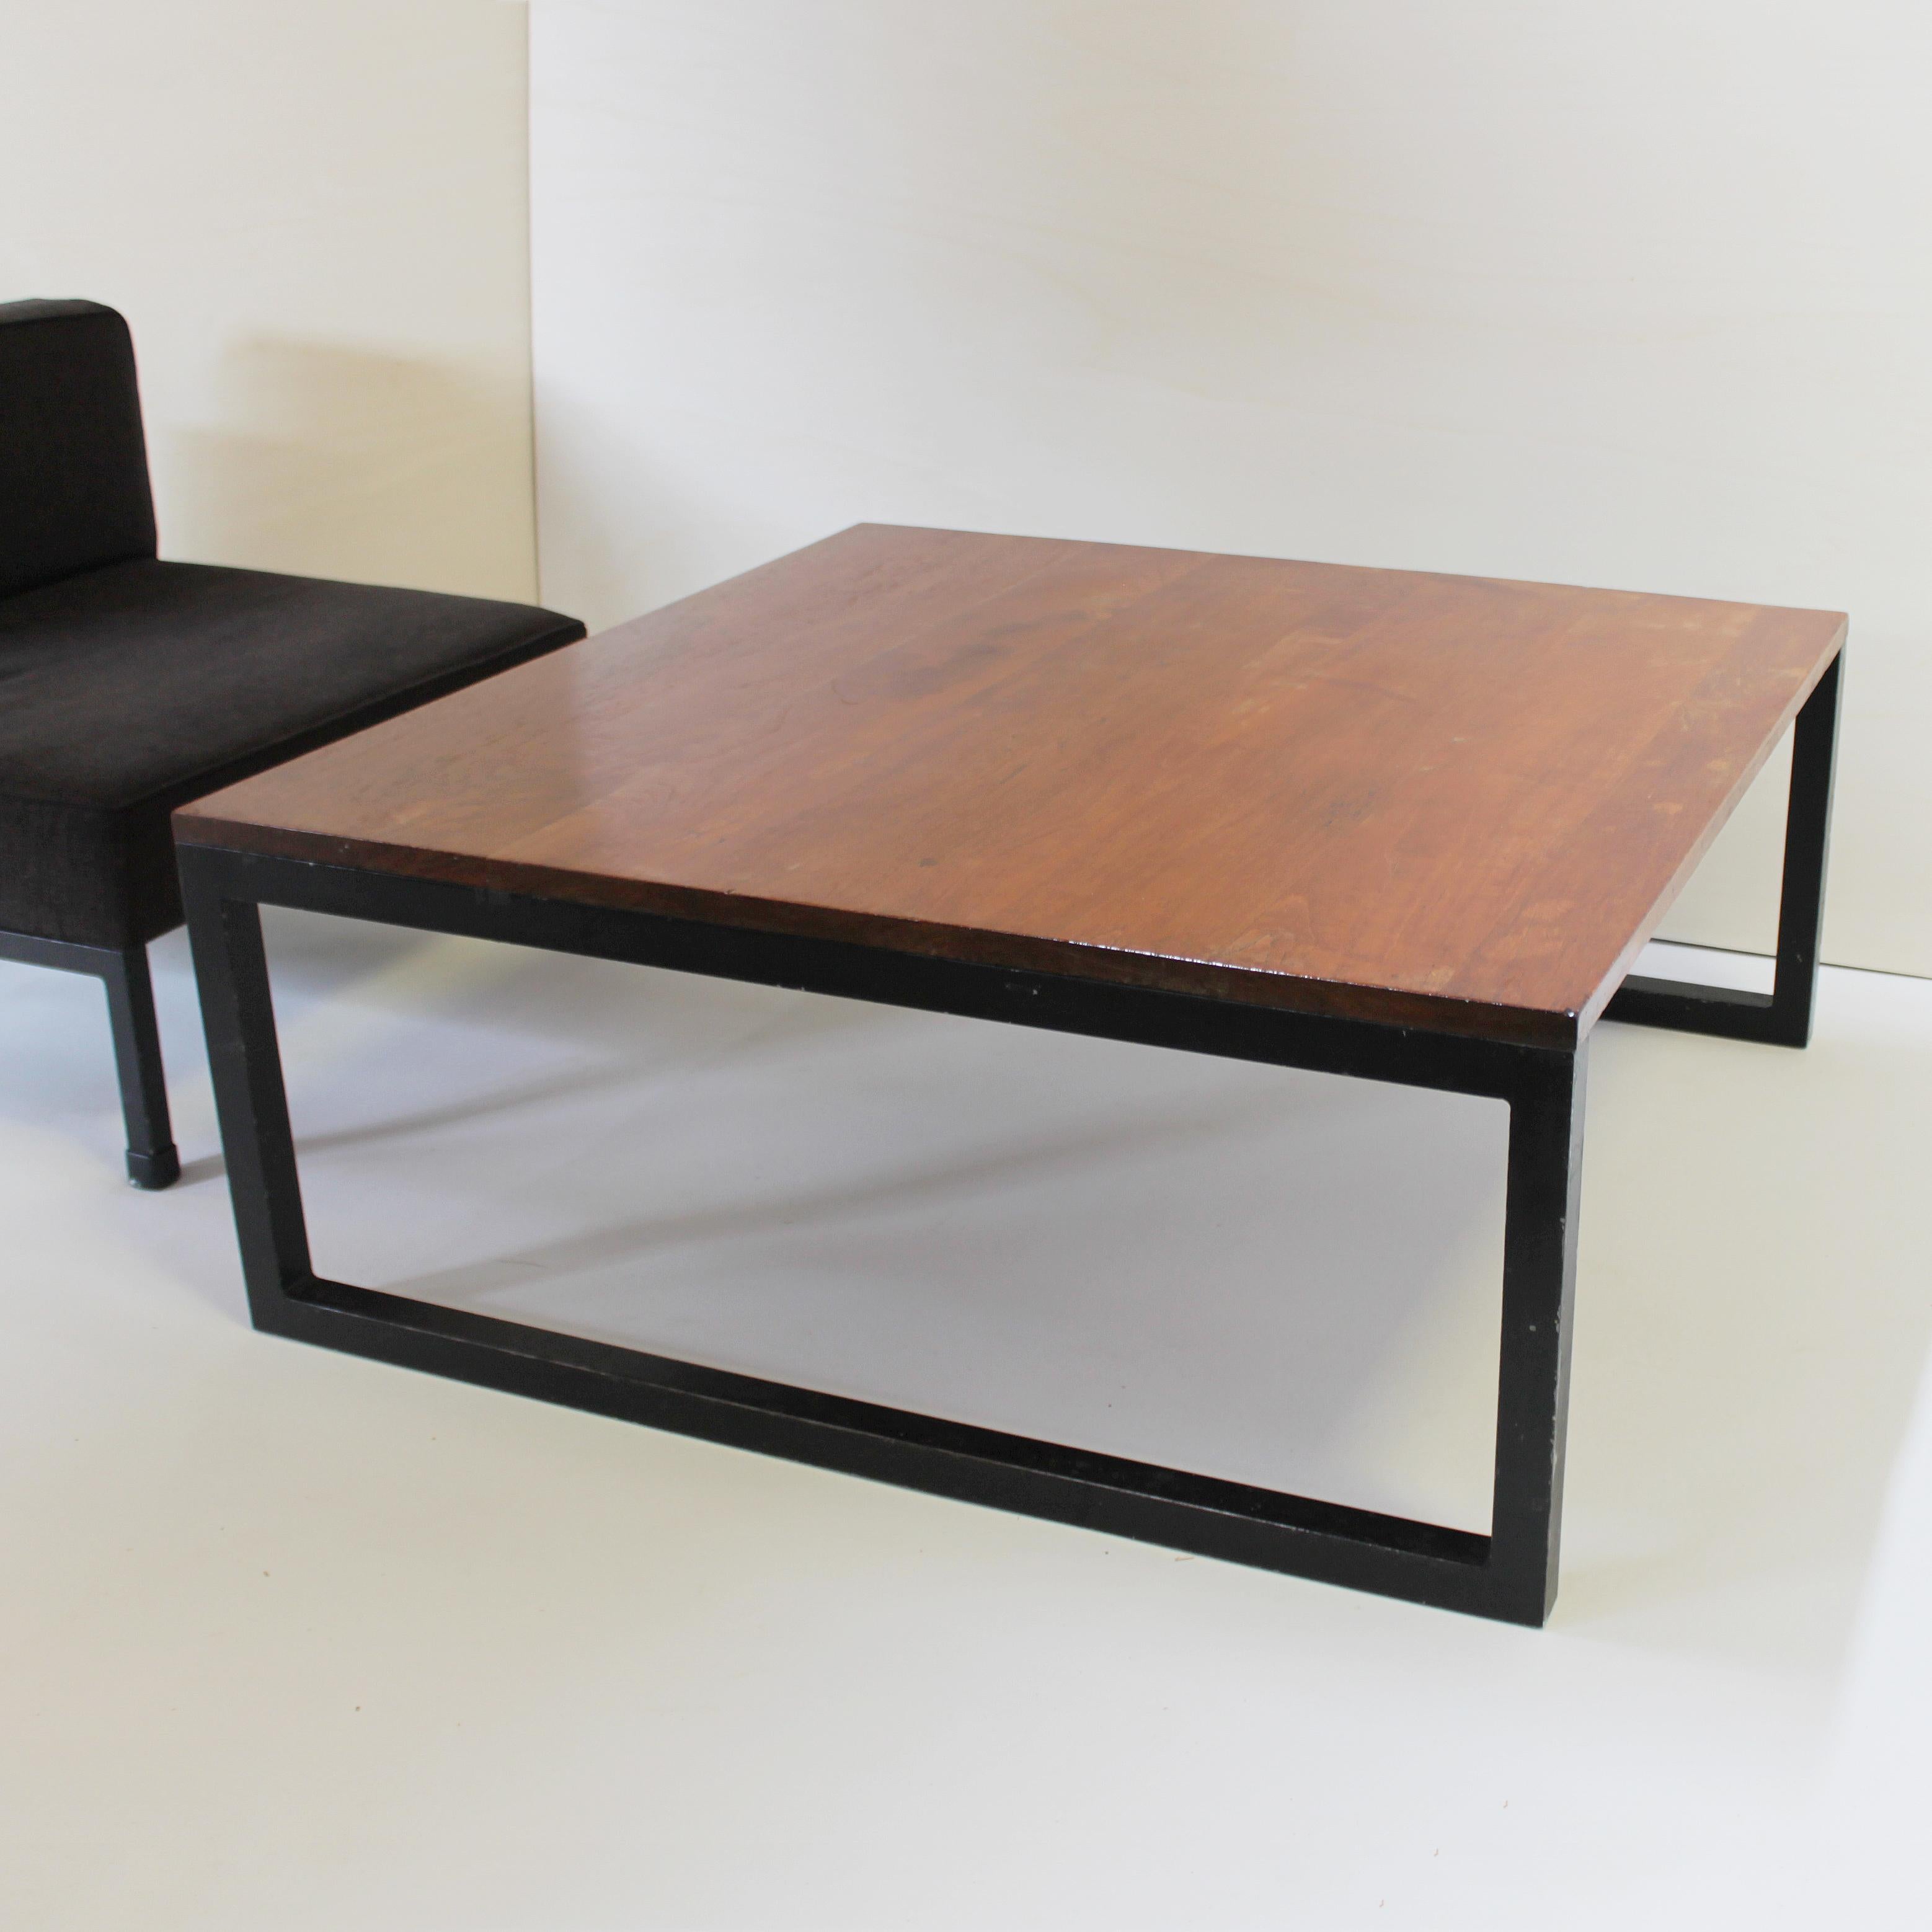 Mid-Century Modern Coffee Table and Two '2' Armchairs by Wim Den Boon, Netherlands, 1958 For Sale